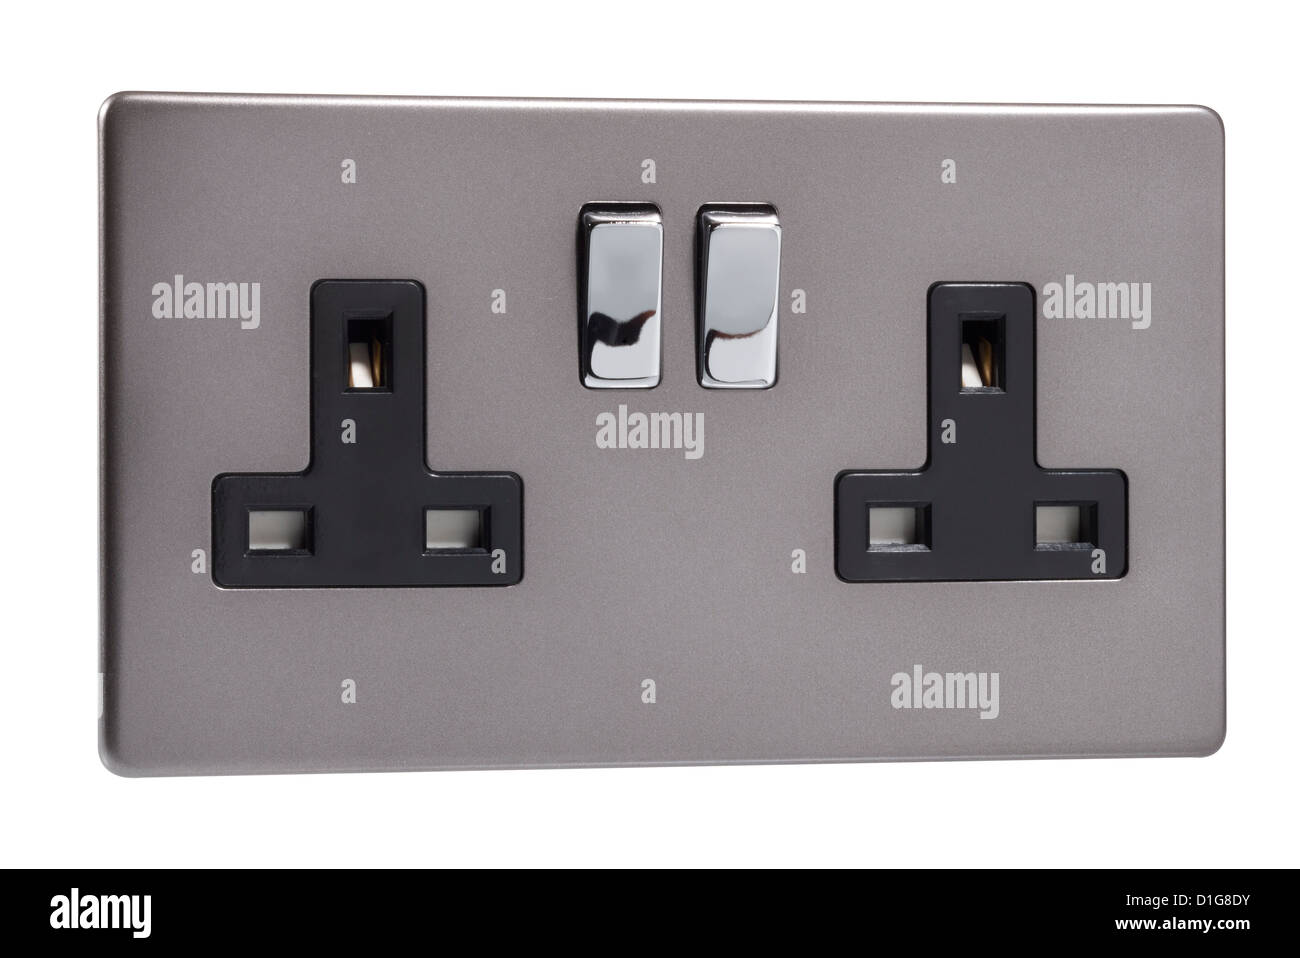 Double UK electrical power socket with switches. Stock Photo